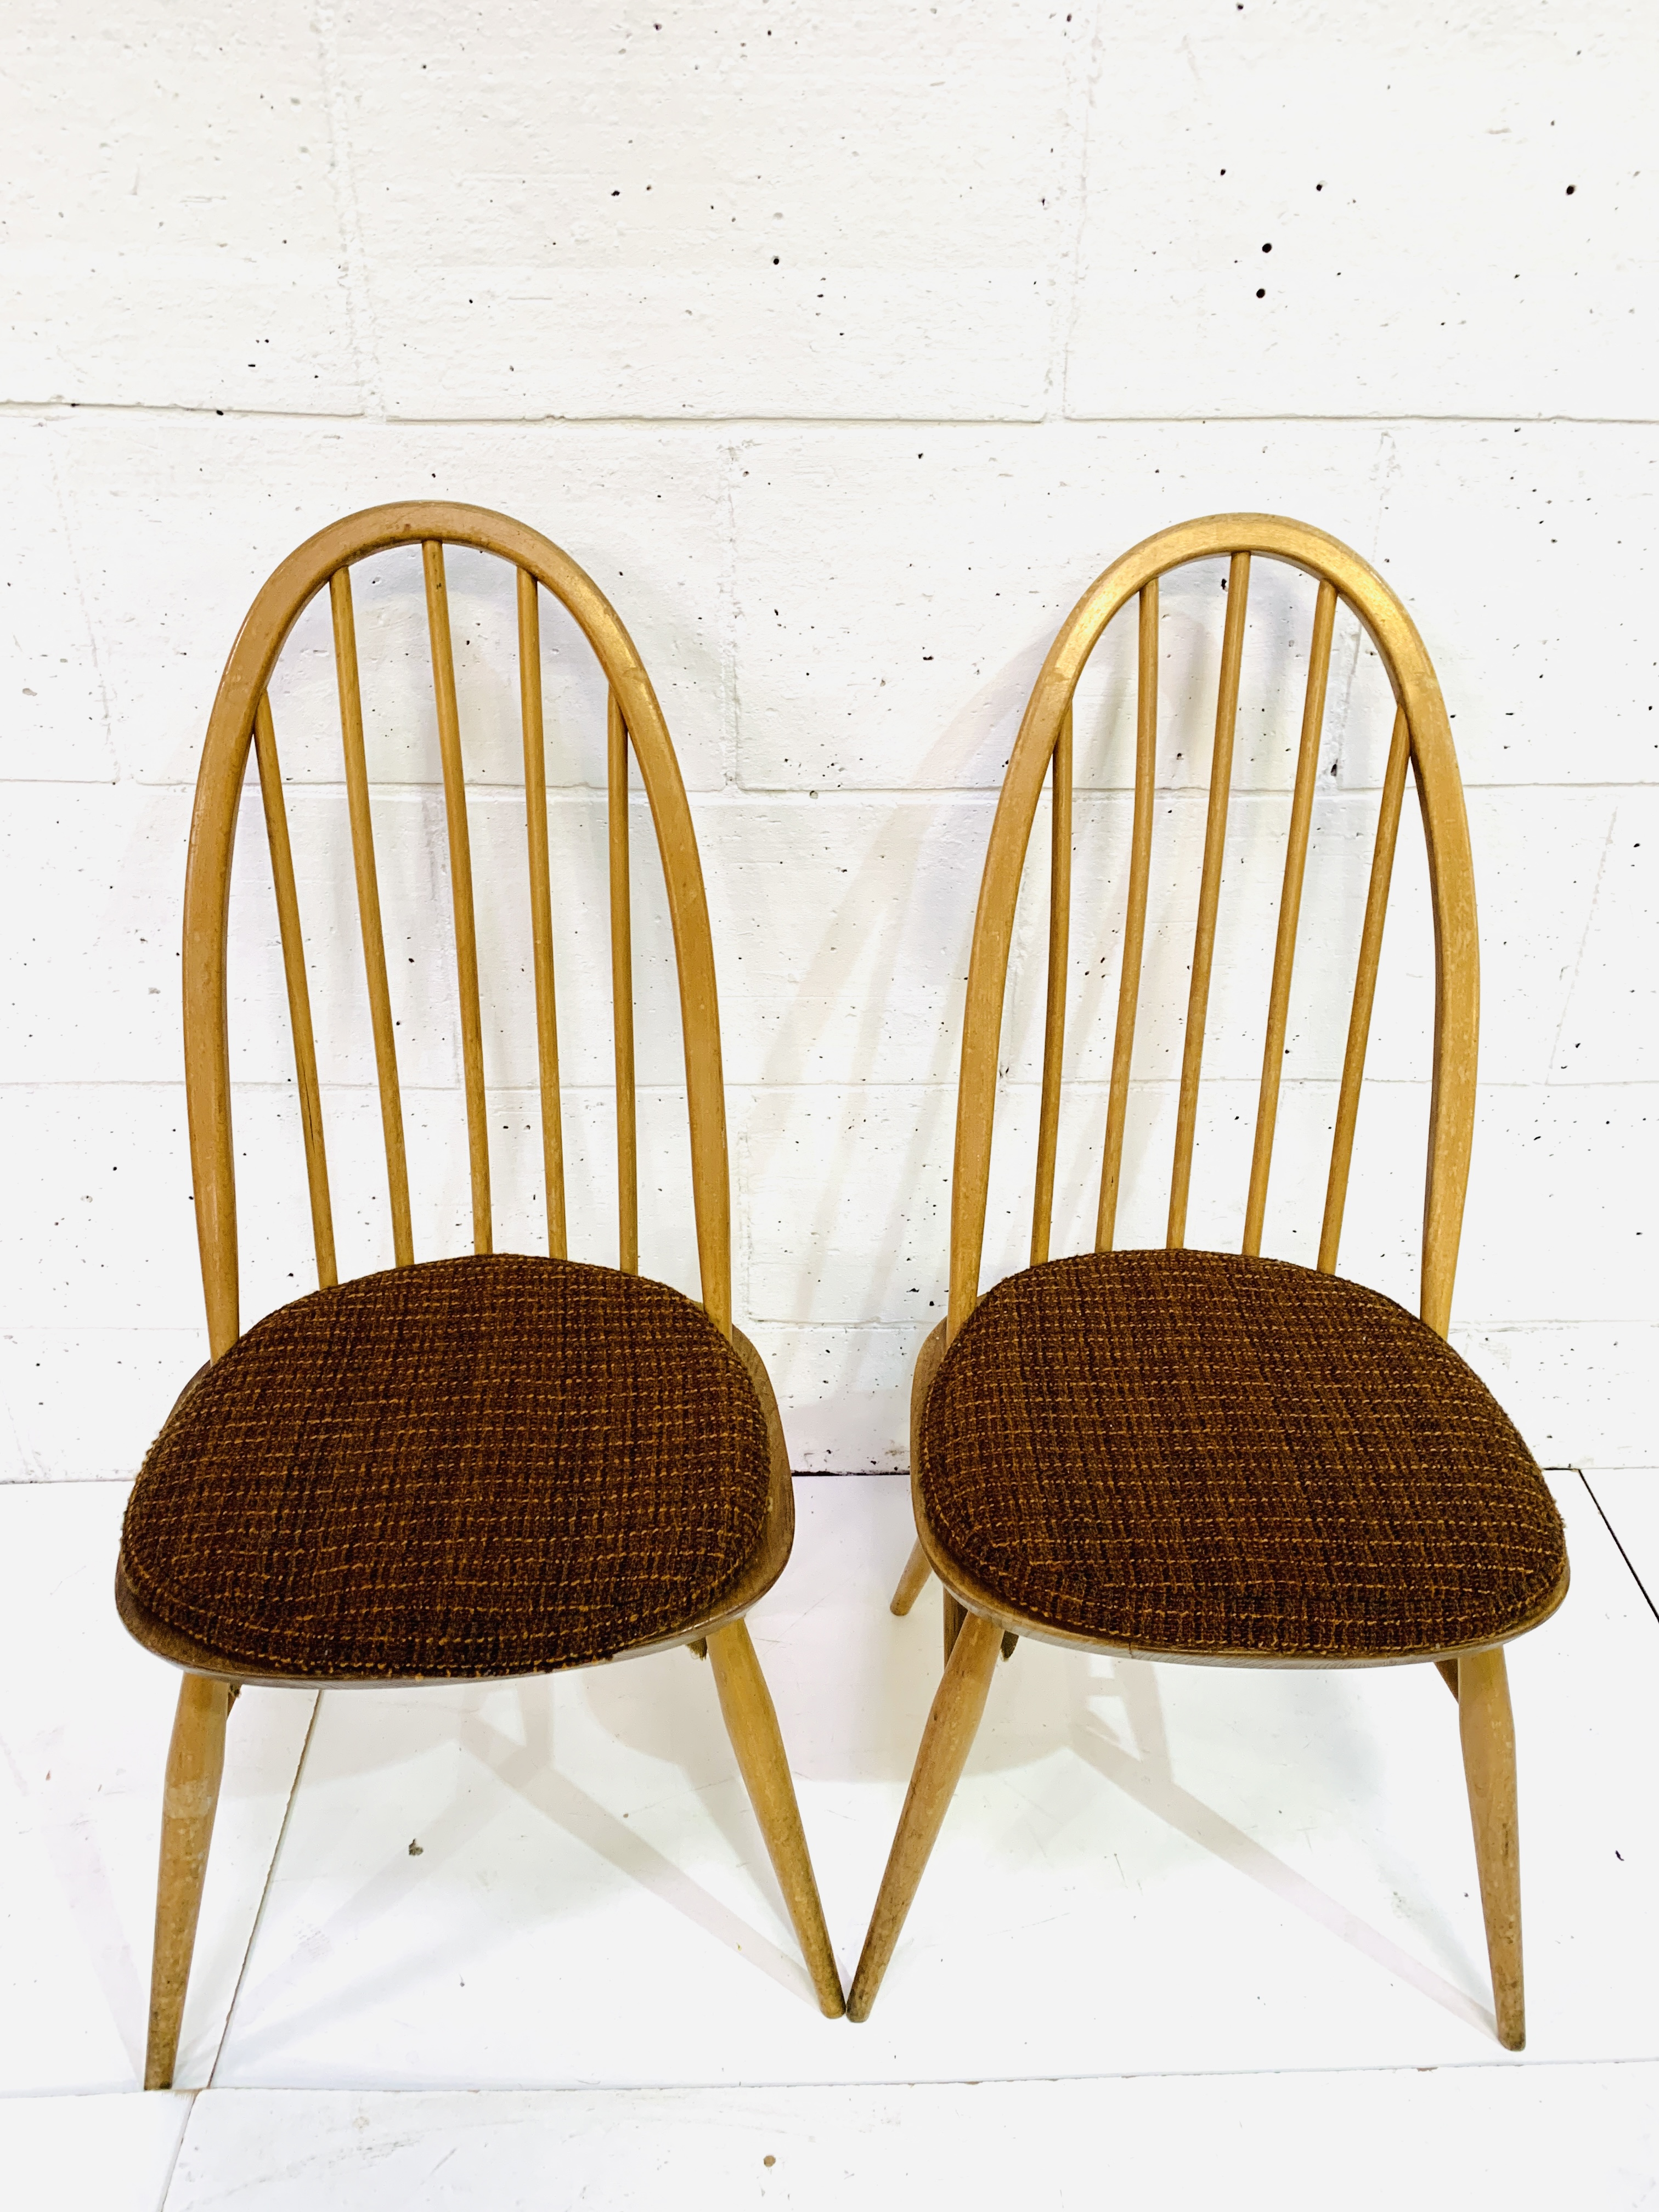 Pair of Ercol rail back chairs - Image 2 of 6